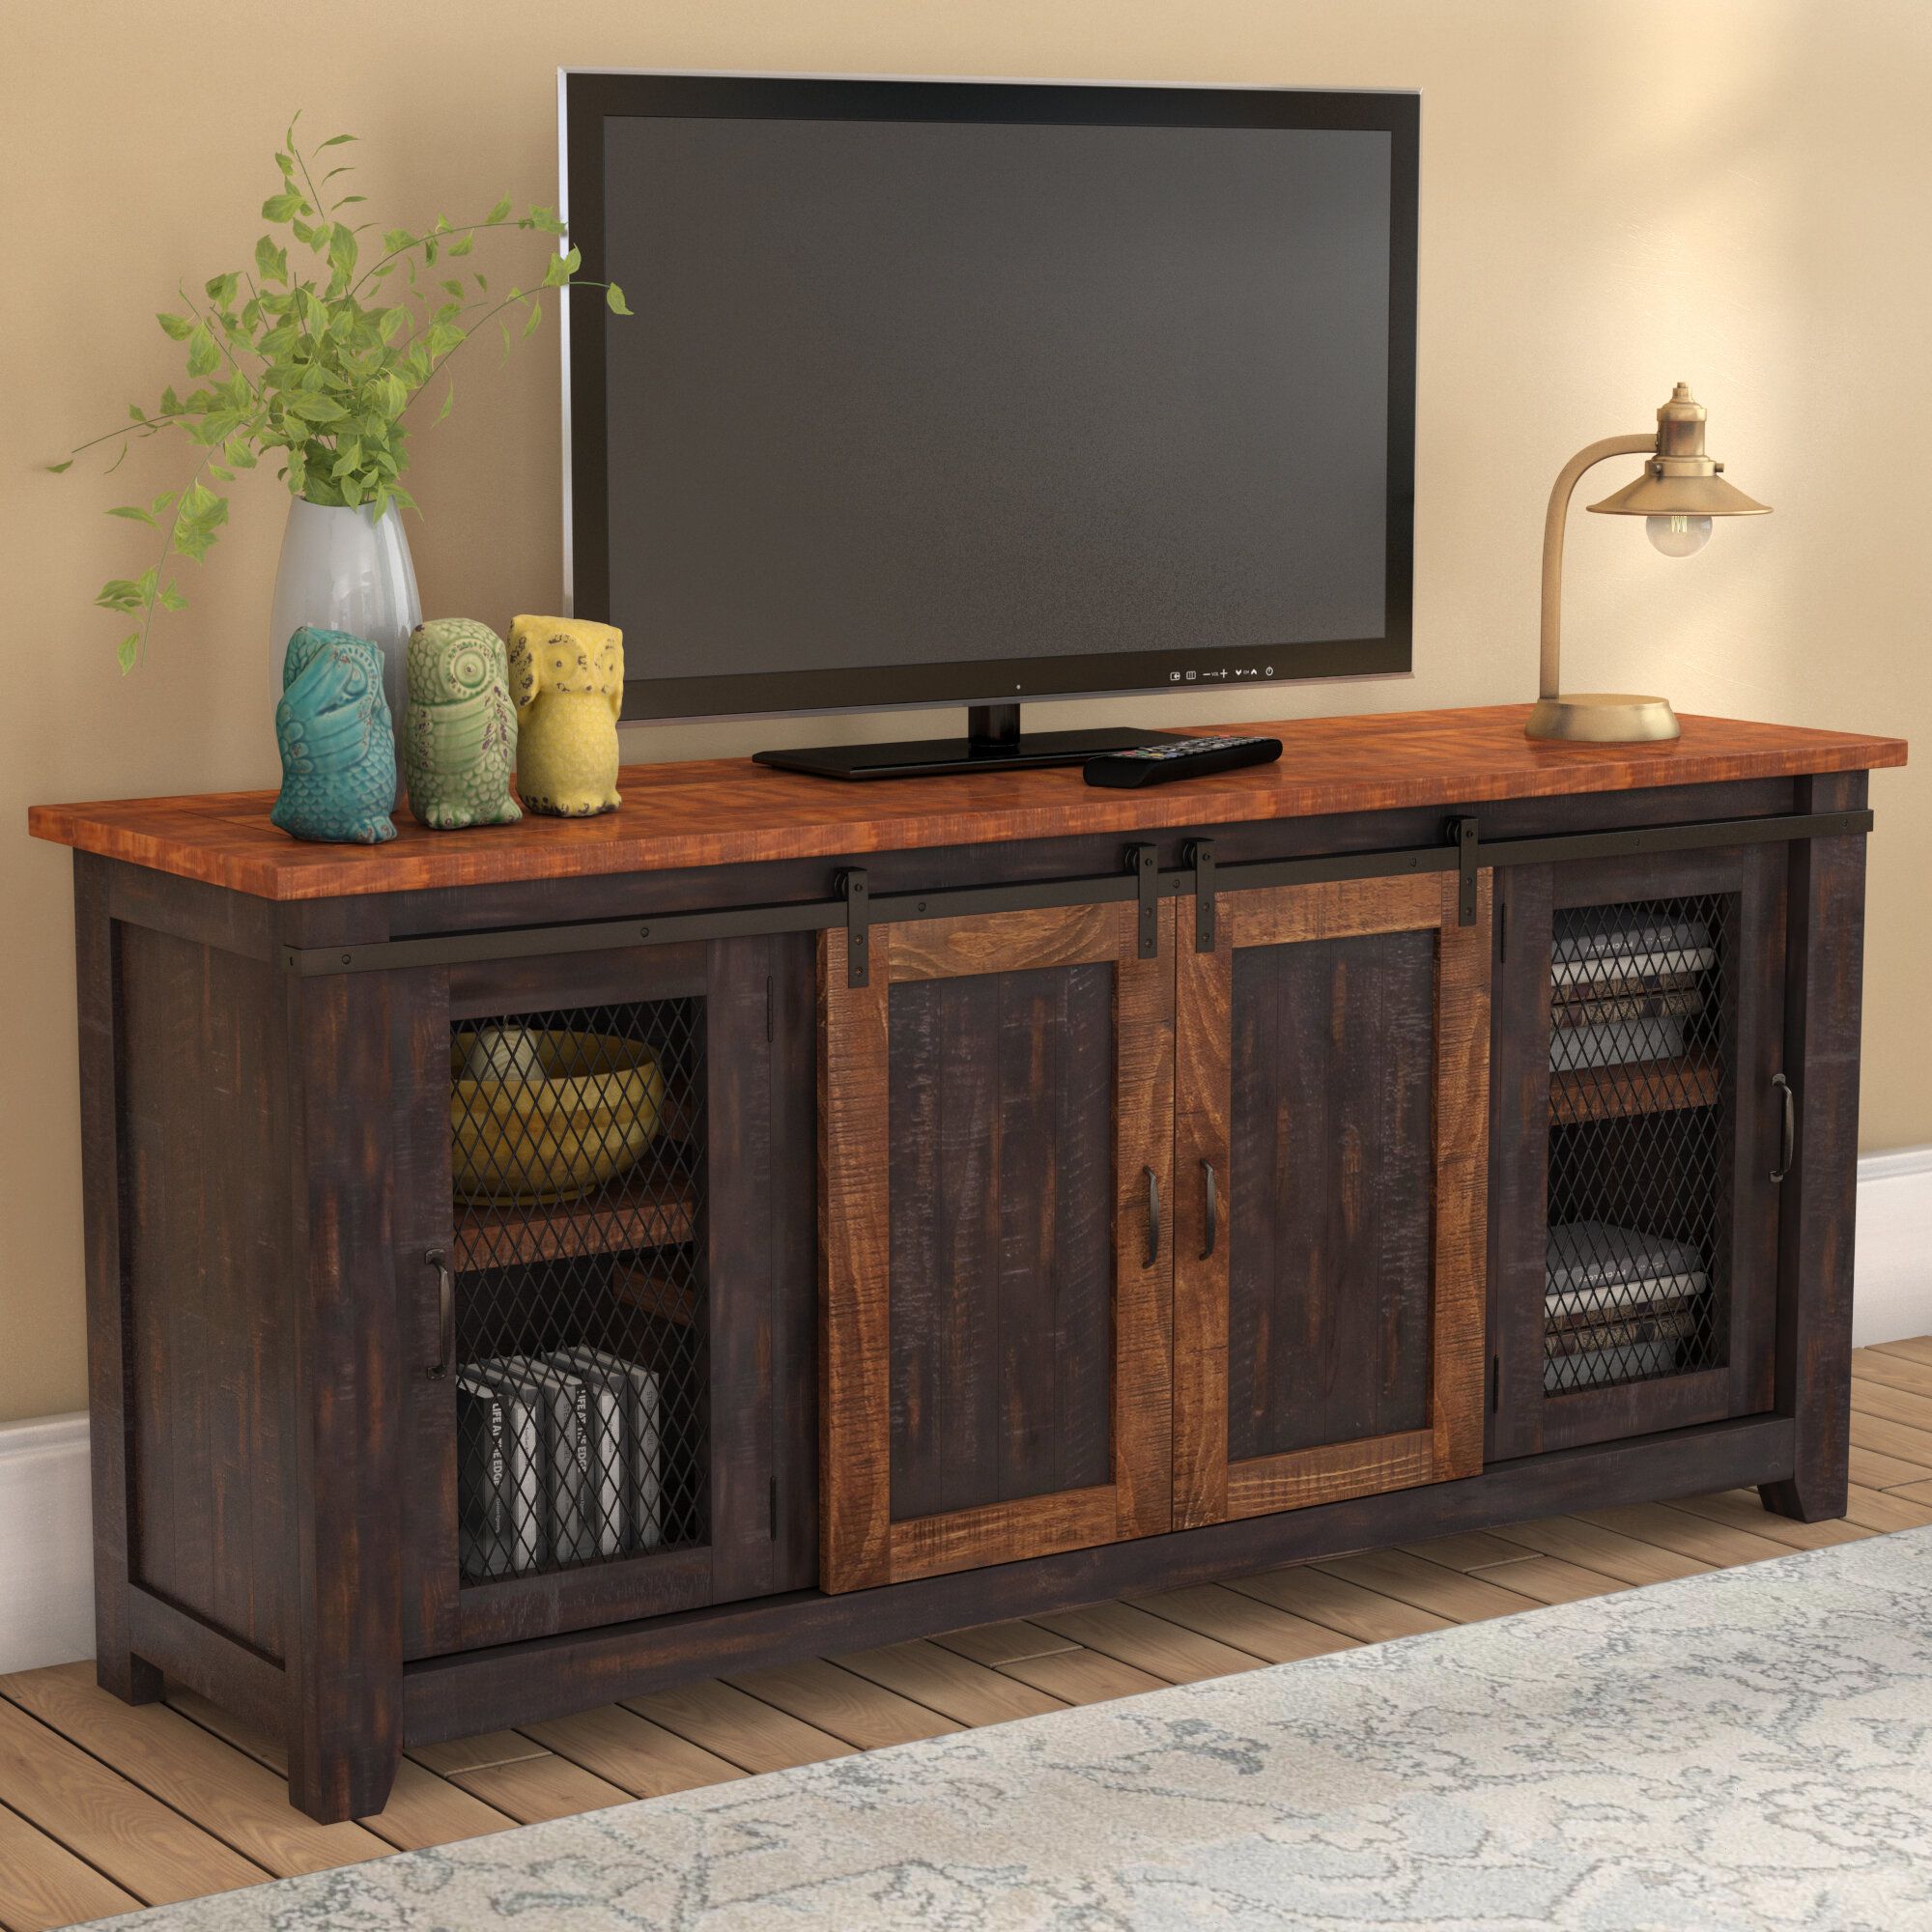 Black Tall Tv Stands & Entertainment Centers You'll Love Pertaining To Tall Black Tv Cabinets (View 2 of 15)